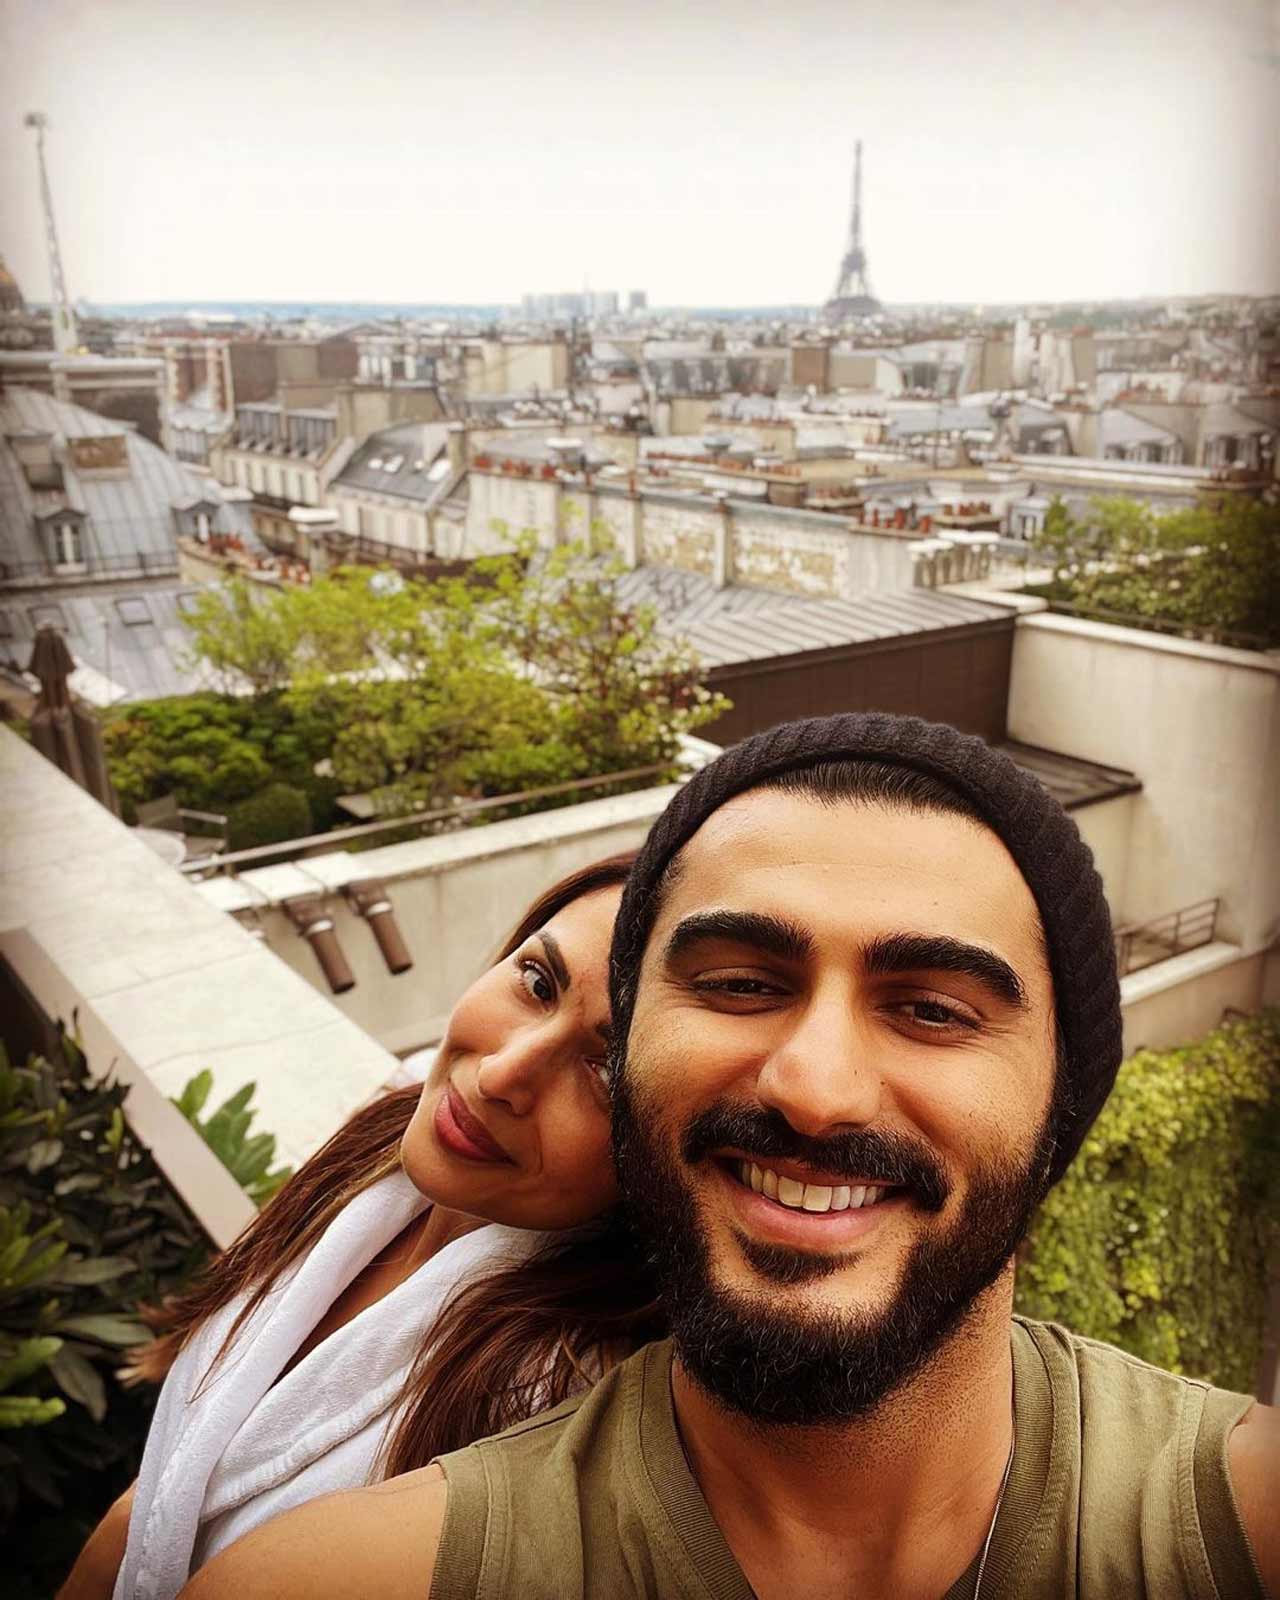 Malaika pointed at the distant Eiffel Tower in the fifth picture as Arjun seemed to slightly raise his eyebrows as if amused. Both the actors looked completely in love, while the beautiful backdrop of Paris made the picture absolutely perfect